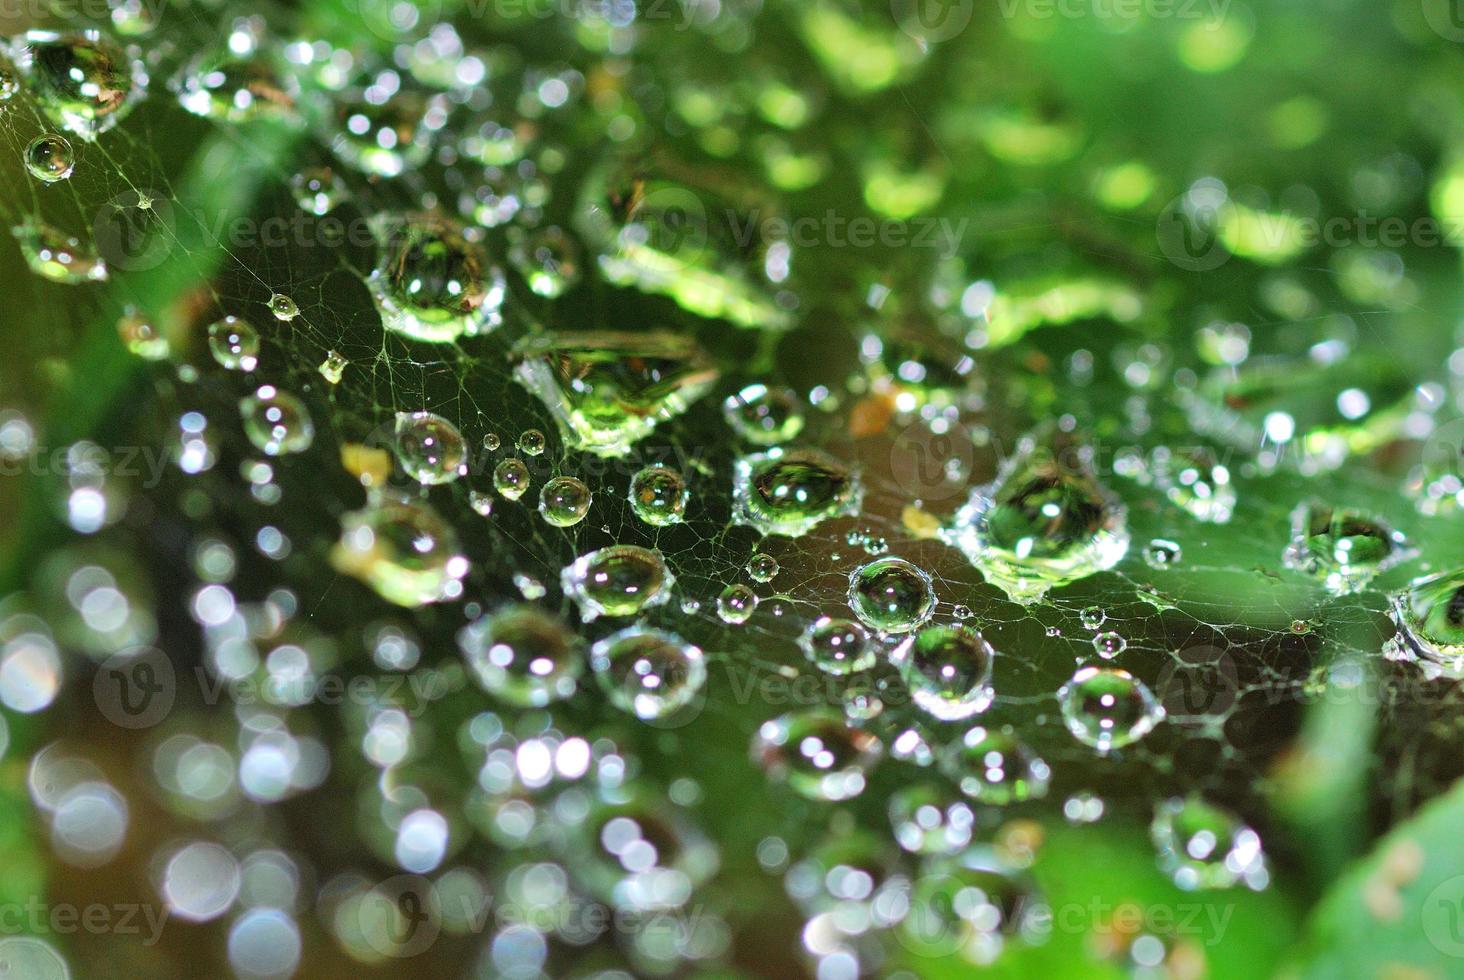 water droplets in the cobweb photo